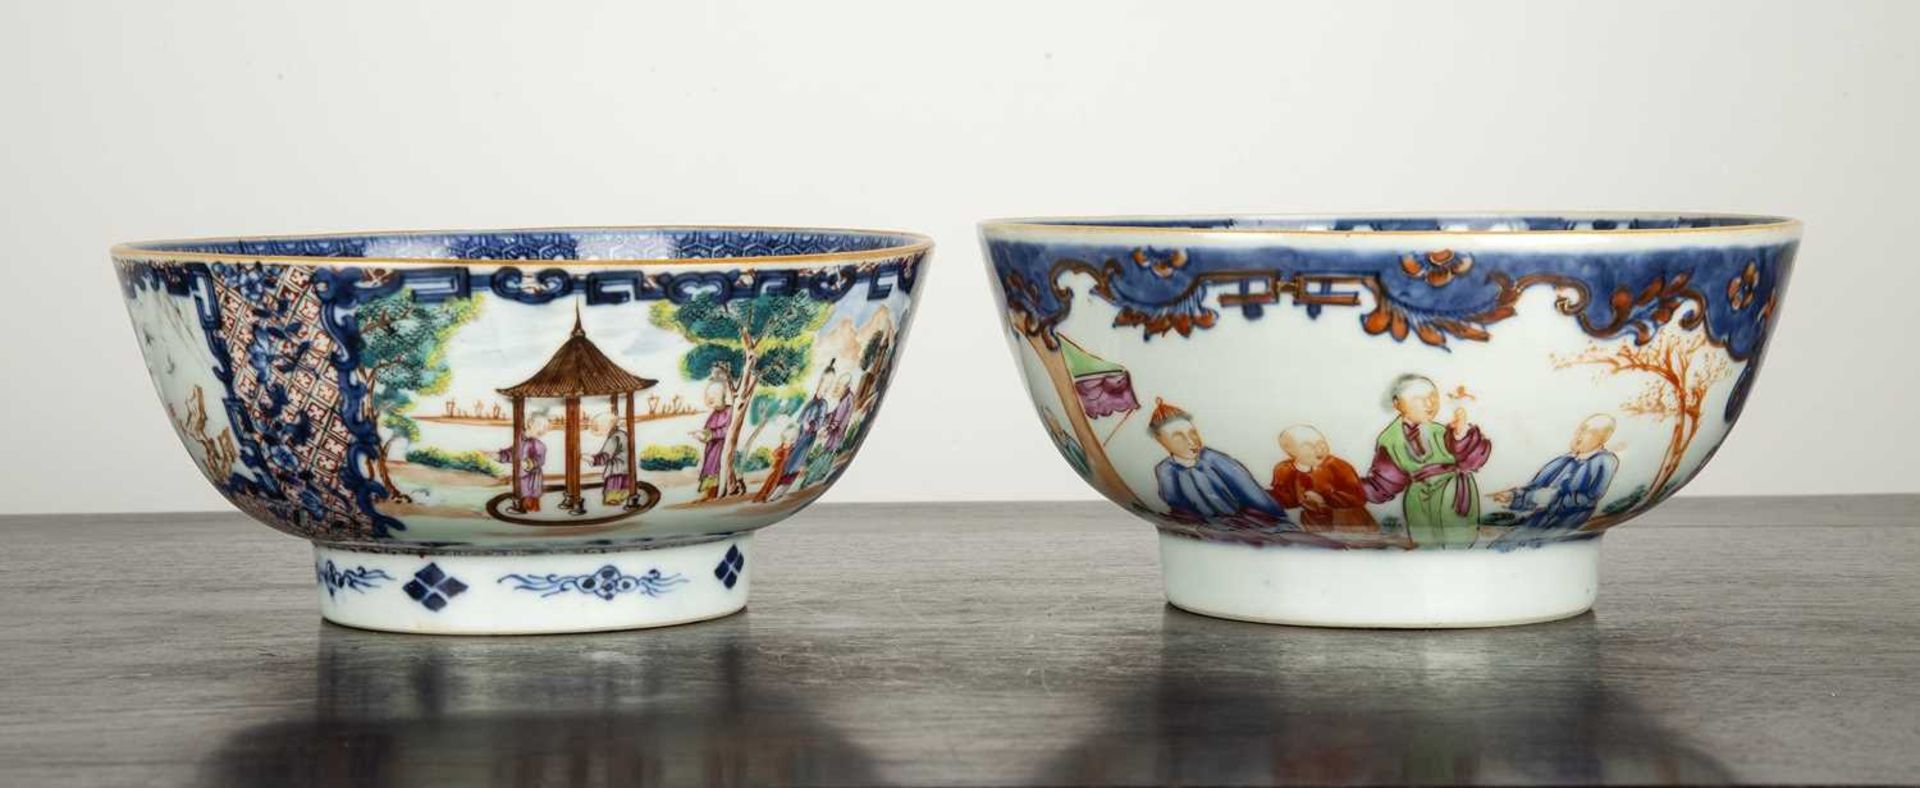 Two Mandarin porcelain bowls Chinese, late 18th Century each painted with panels of figures and